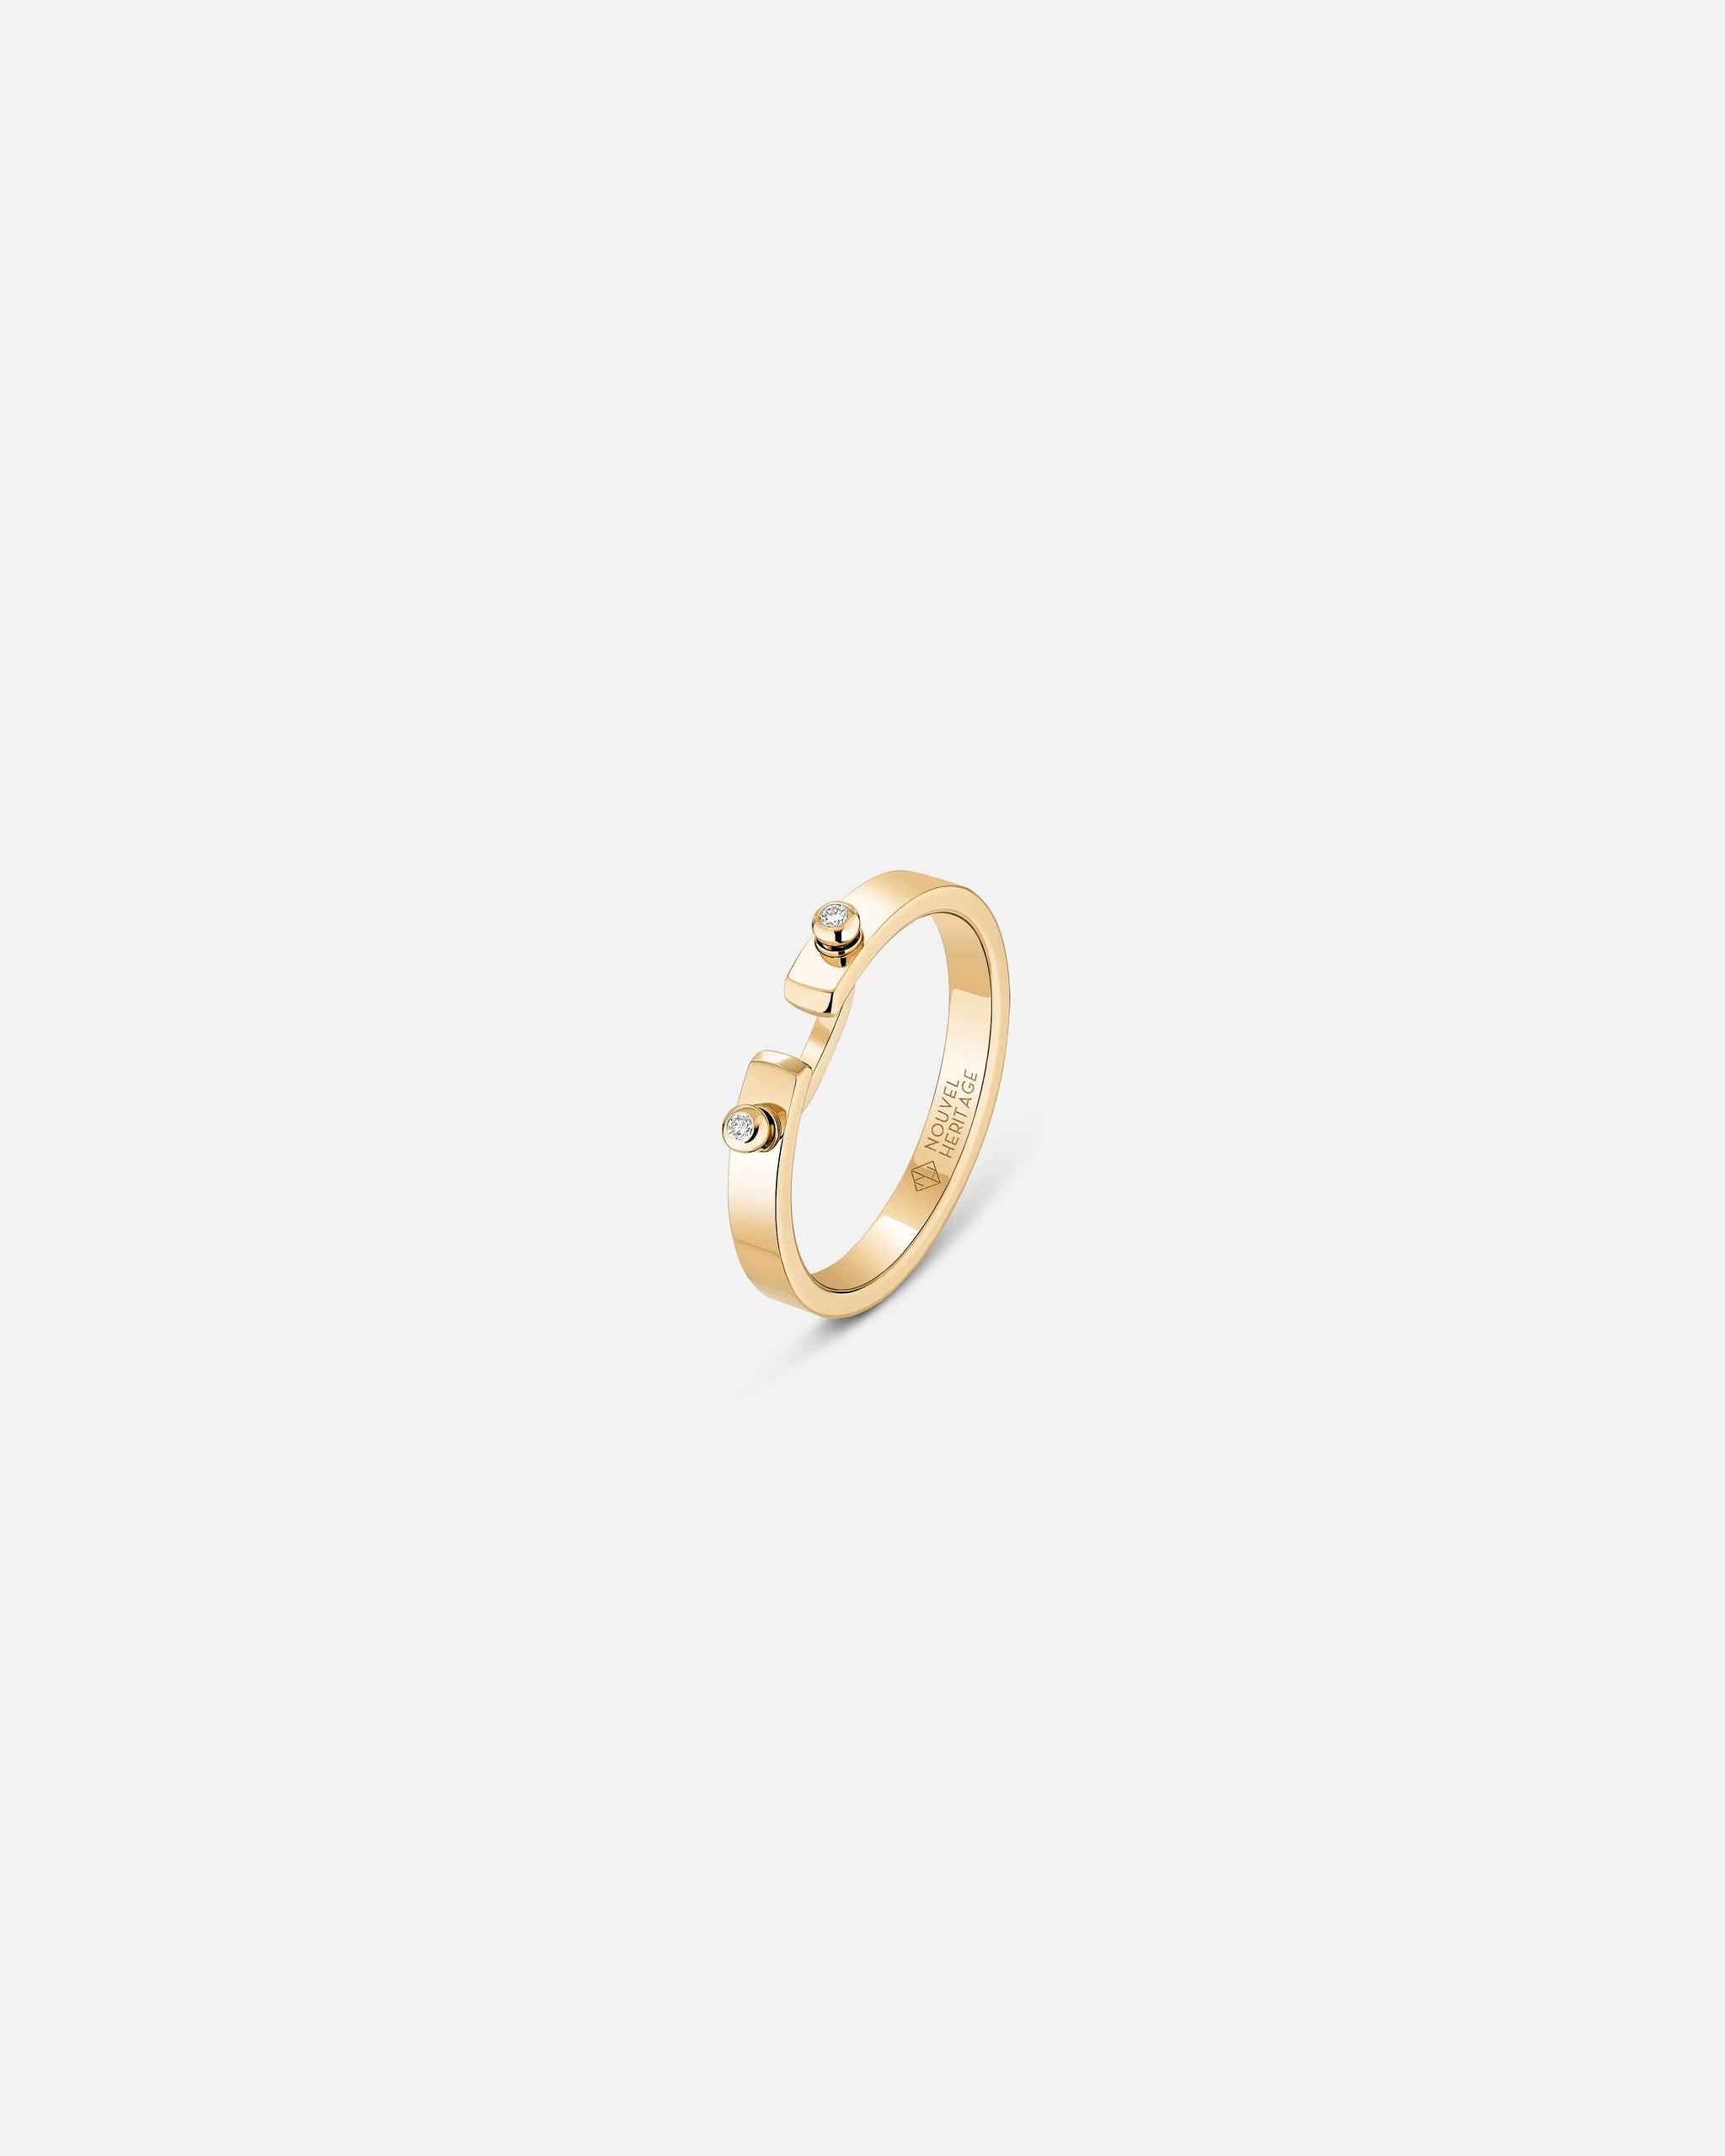 Monday Morning PM Mood Ring in Yellow Gold - 1 - Nouvel Heritage